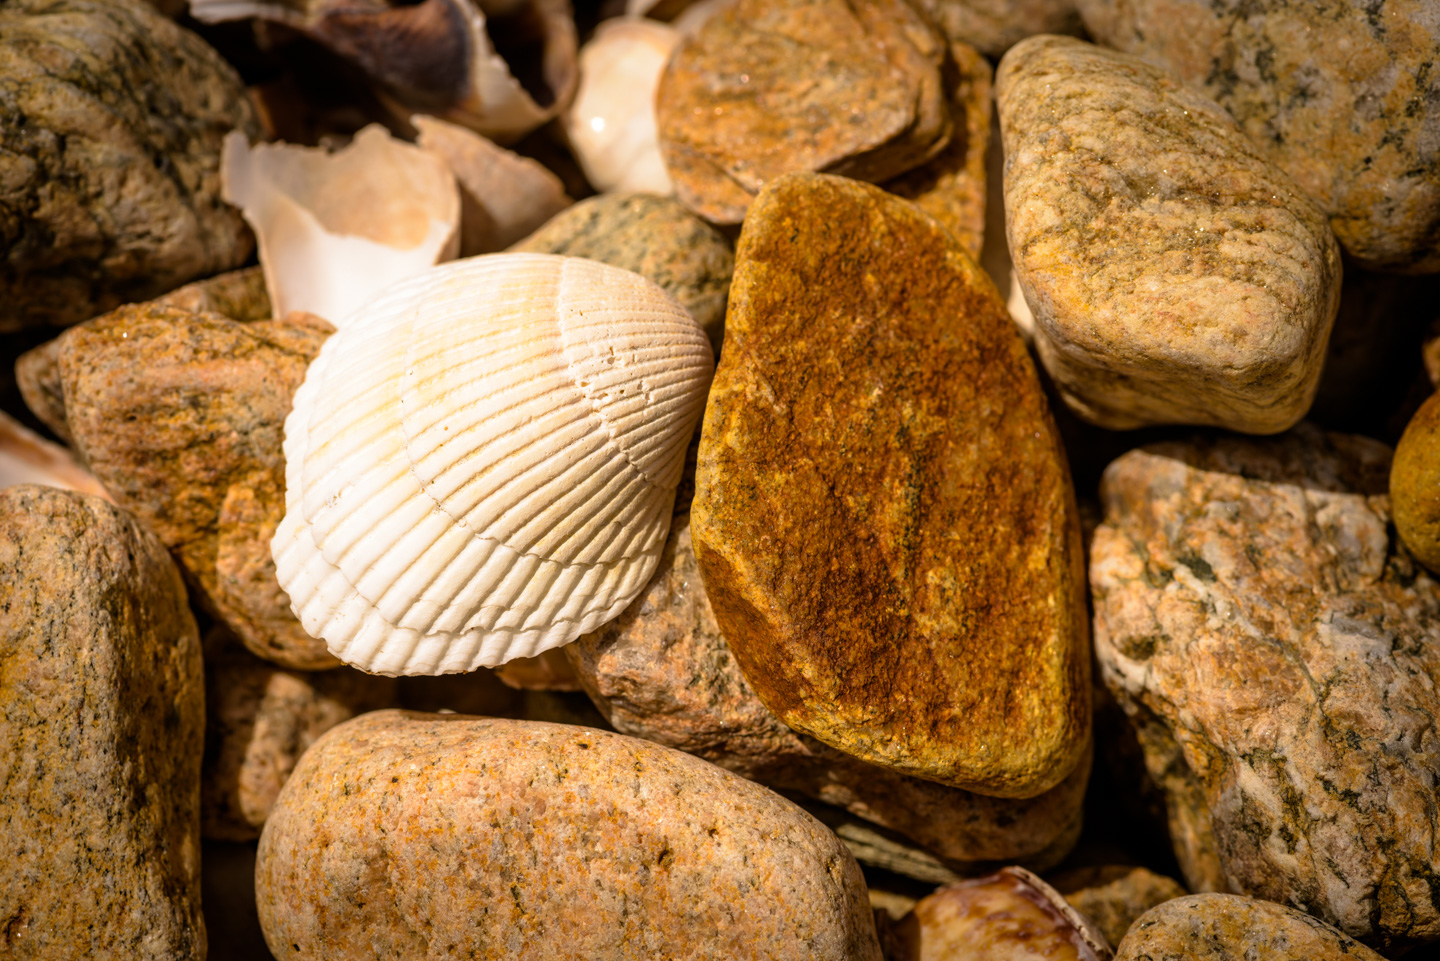 Picture of a shell and a rock